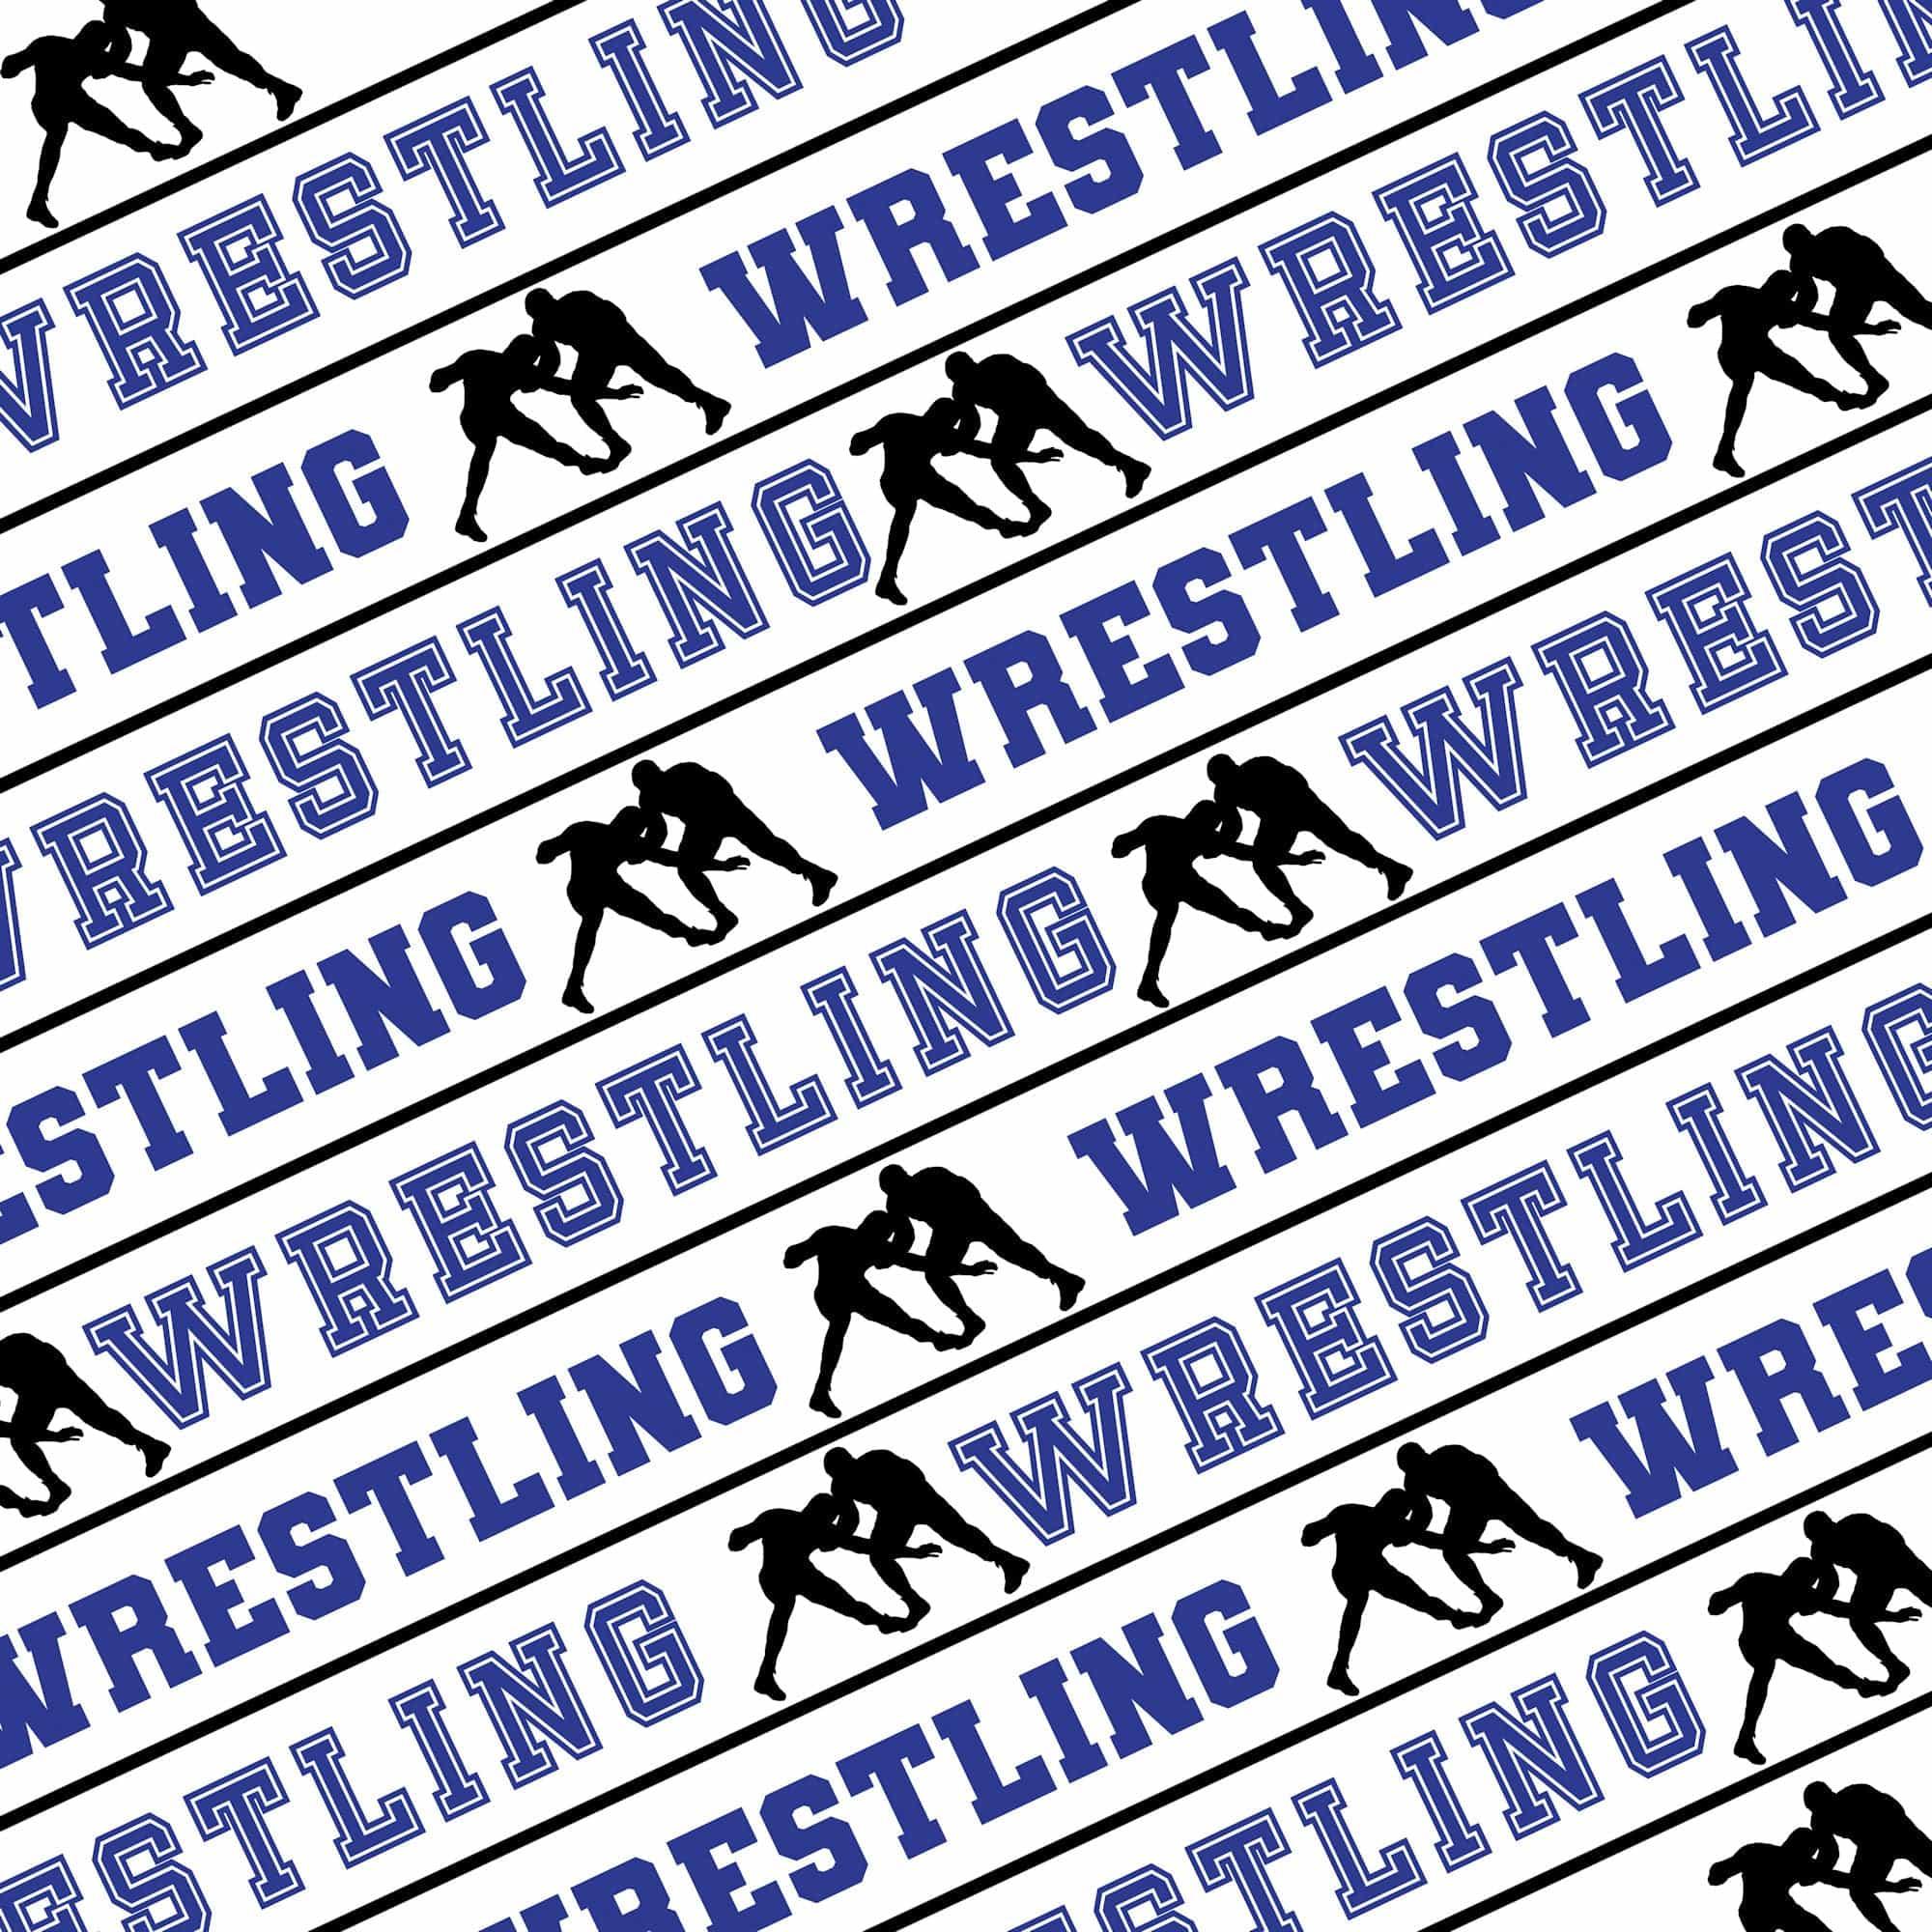 Male Wrestling Collection On The Mat 12 x 12 Double-Sided Scrapbook Paper by SSC Designs - Scrapbook Supply Companies